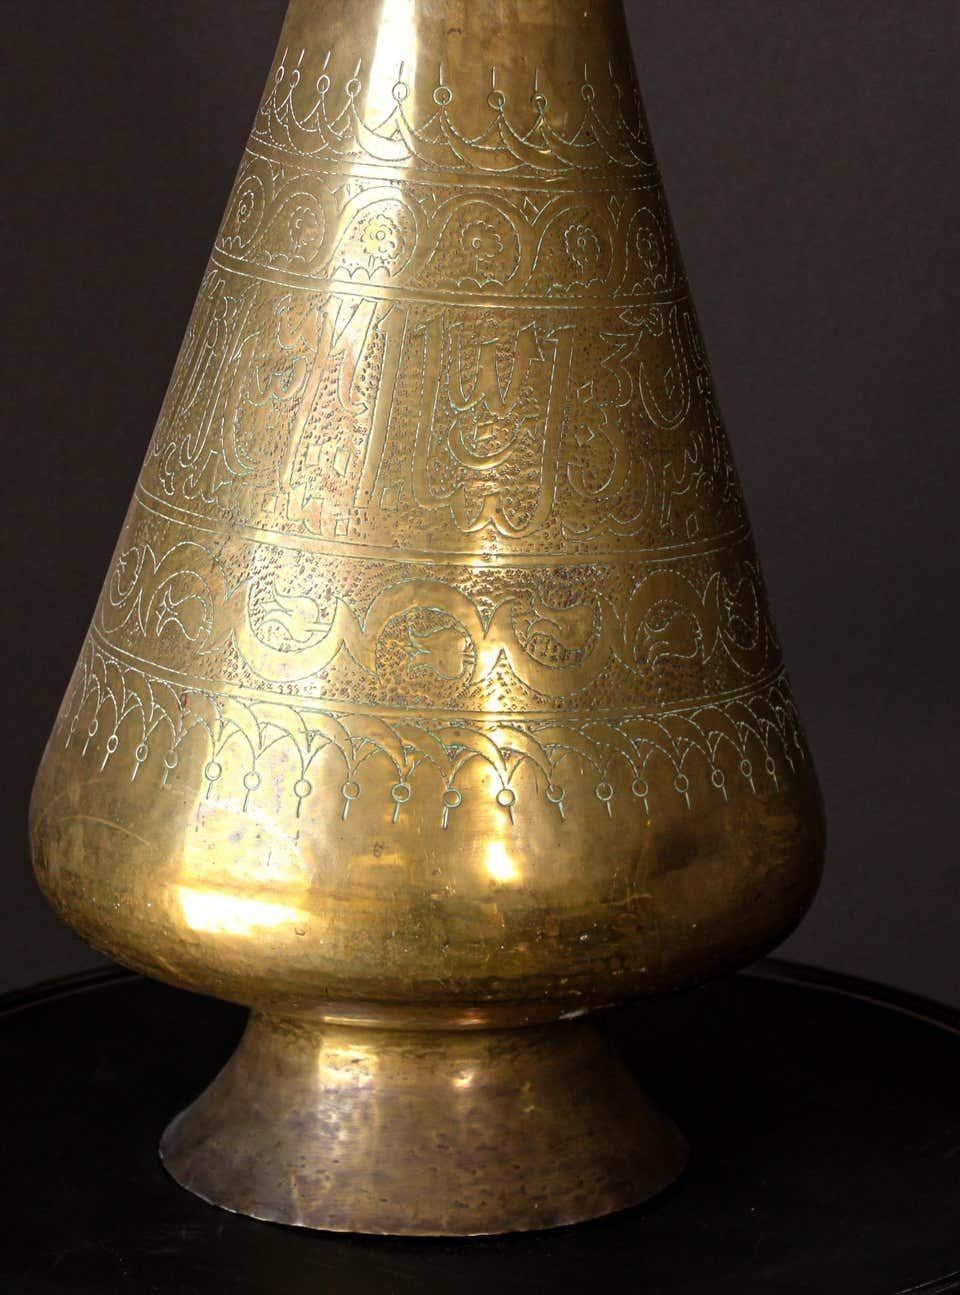 Arabian Middle Eastern Brass Islamic Art Vase Engraved With Arabic Calligraphy For Sale 7